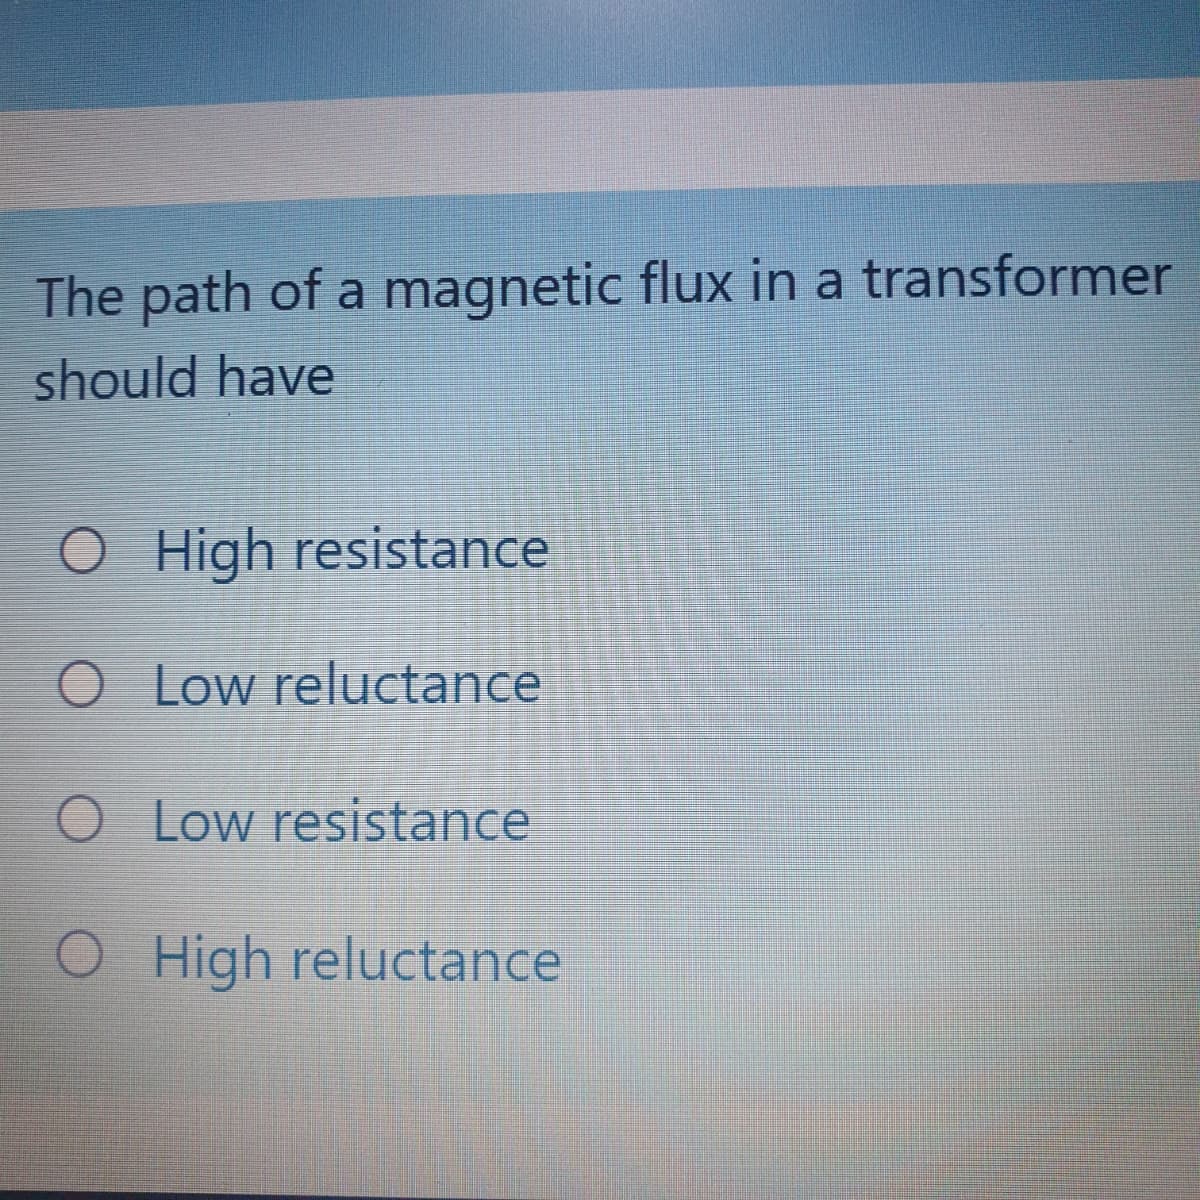 The path of a magnetic flux in a transformer
should have
O High resistance
O Low reluctance
O Low resistance
O High reluctance
